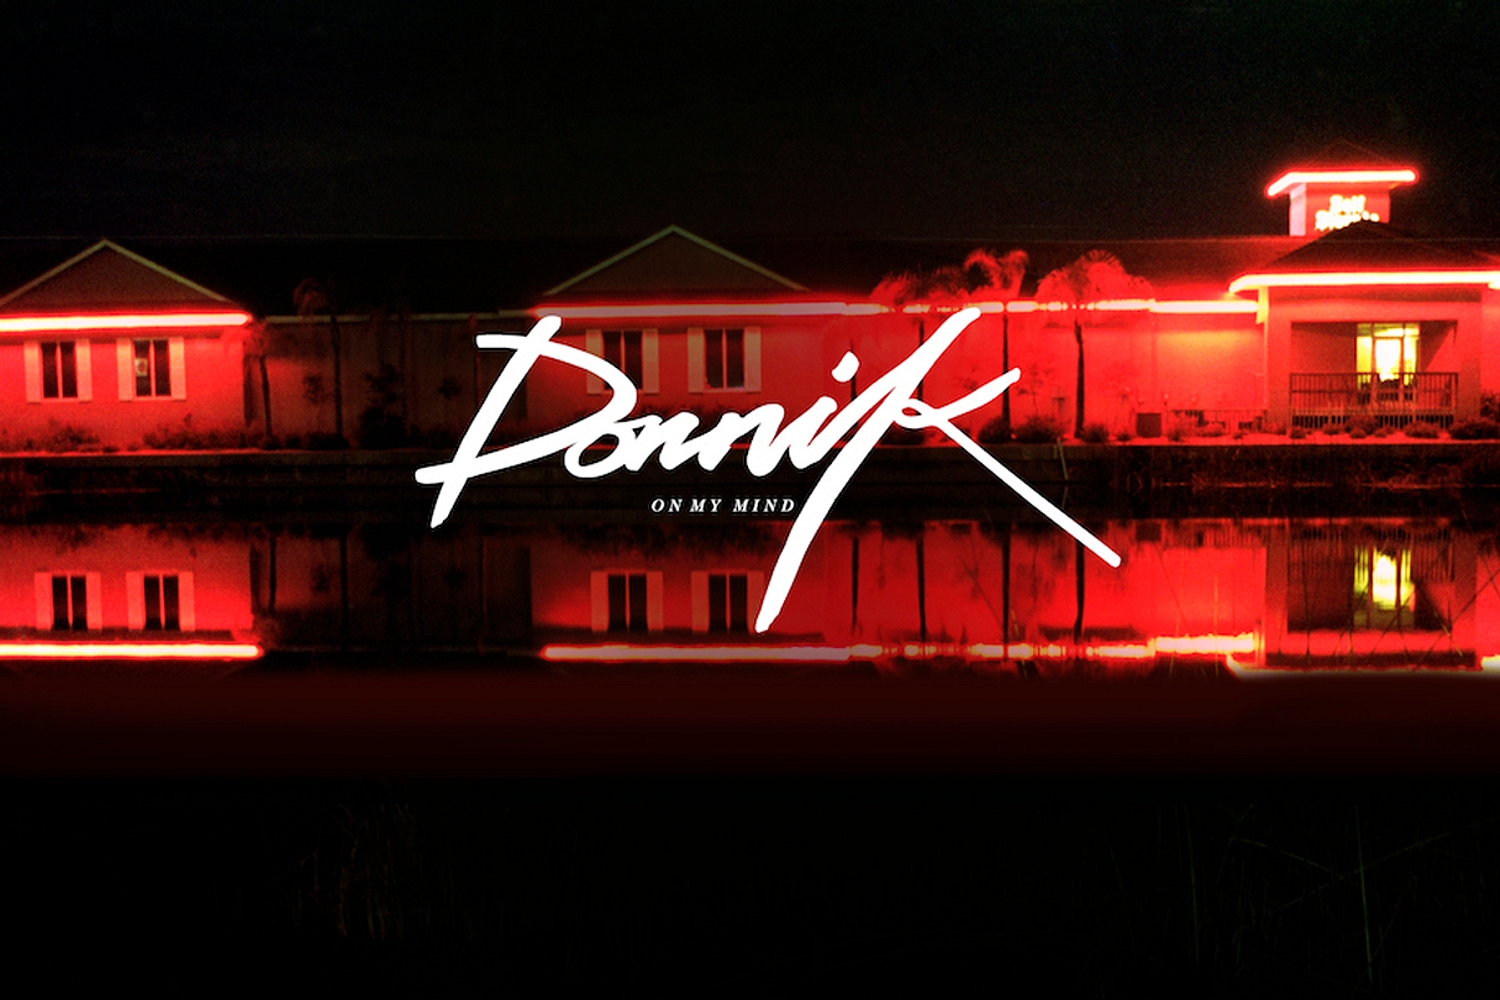 Dornik unveils new B-side, ‘Second Thoughts’